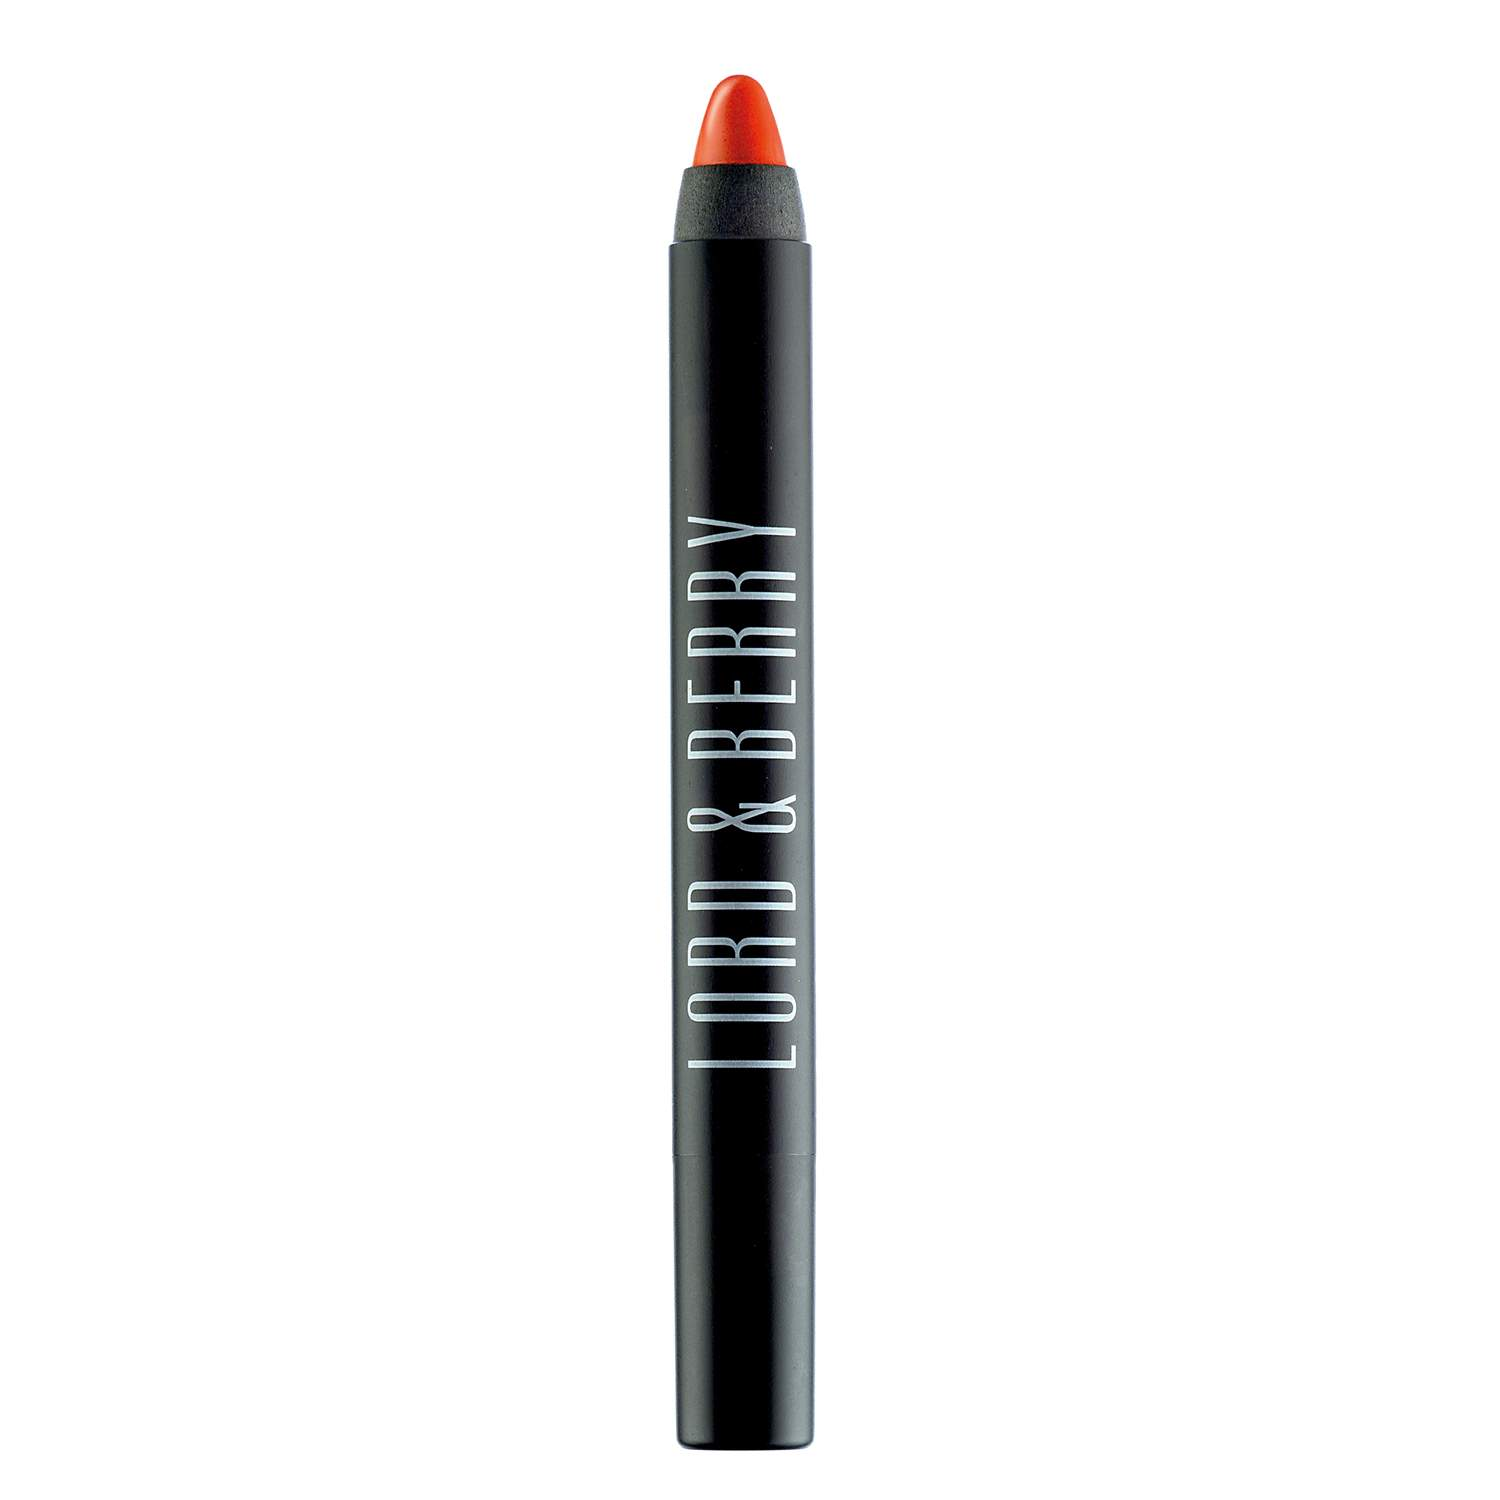 Lord & Berry 20100 Shiny Lipstick Pencil Lord & Berry 20100 Shiny Lipstick Pencil - Fire 1